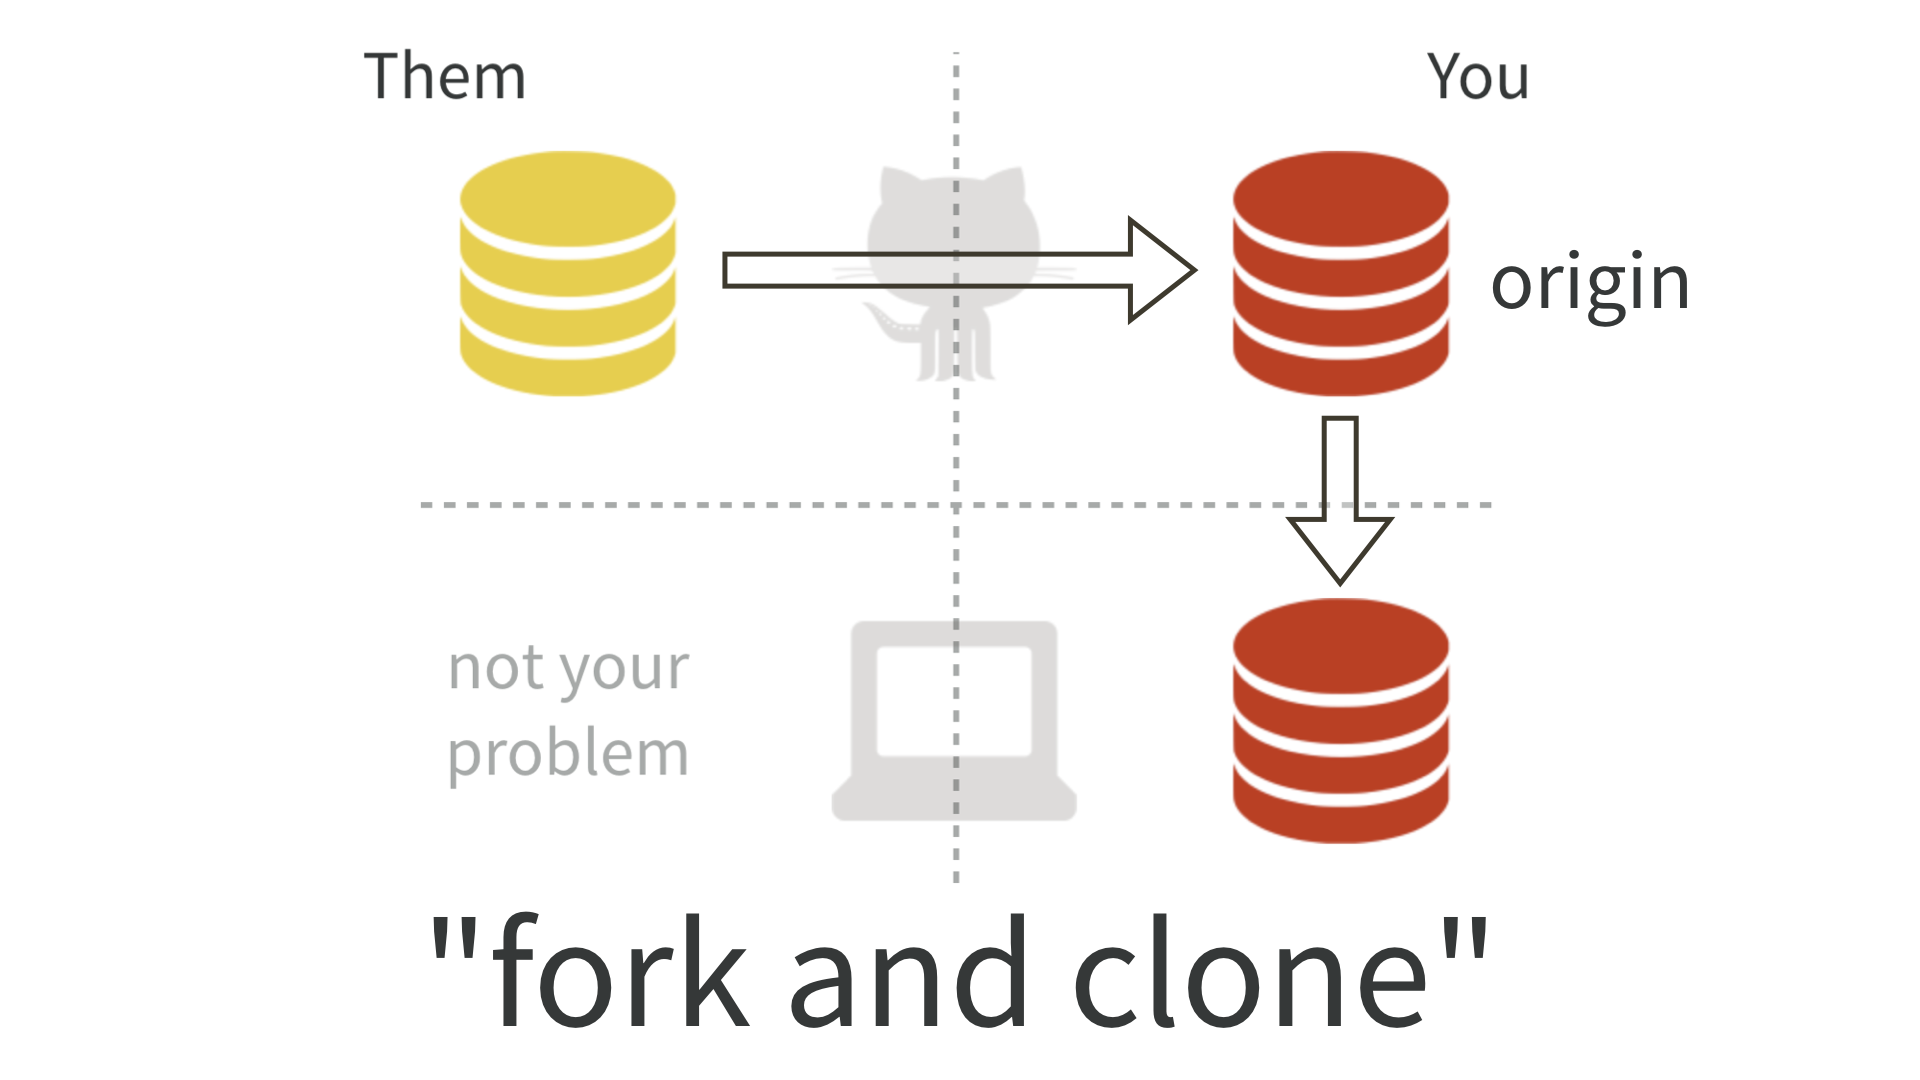 ../../_images/fork-and-clone.png